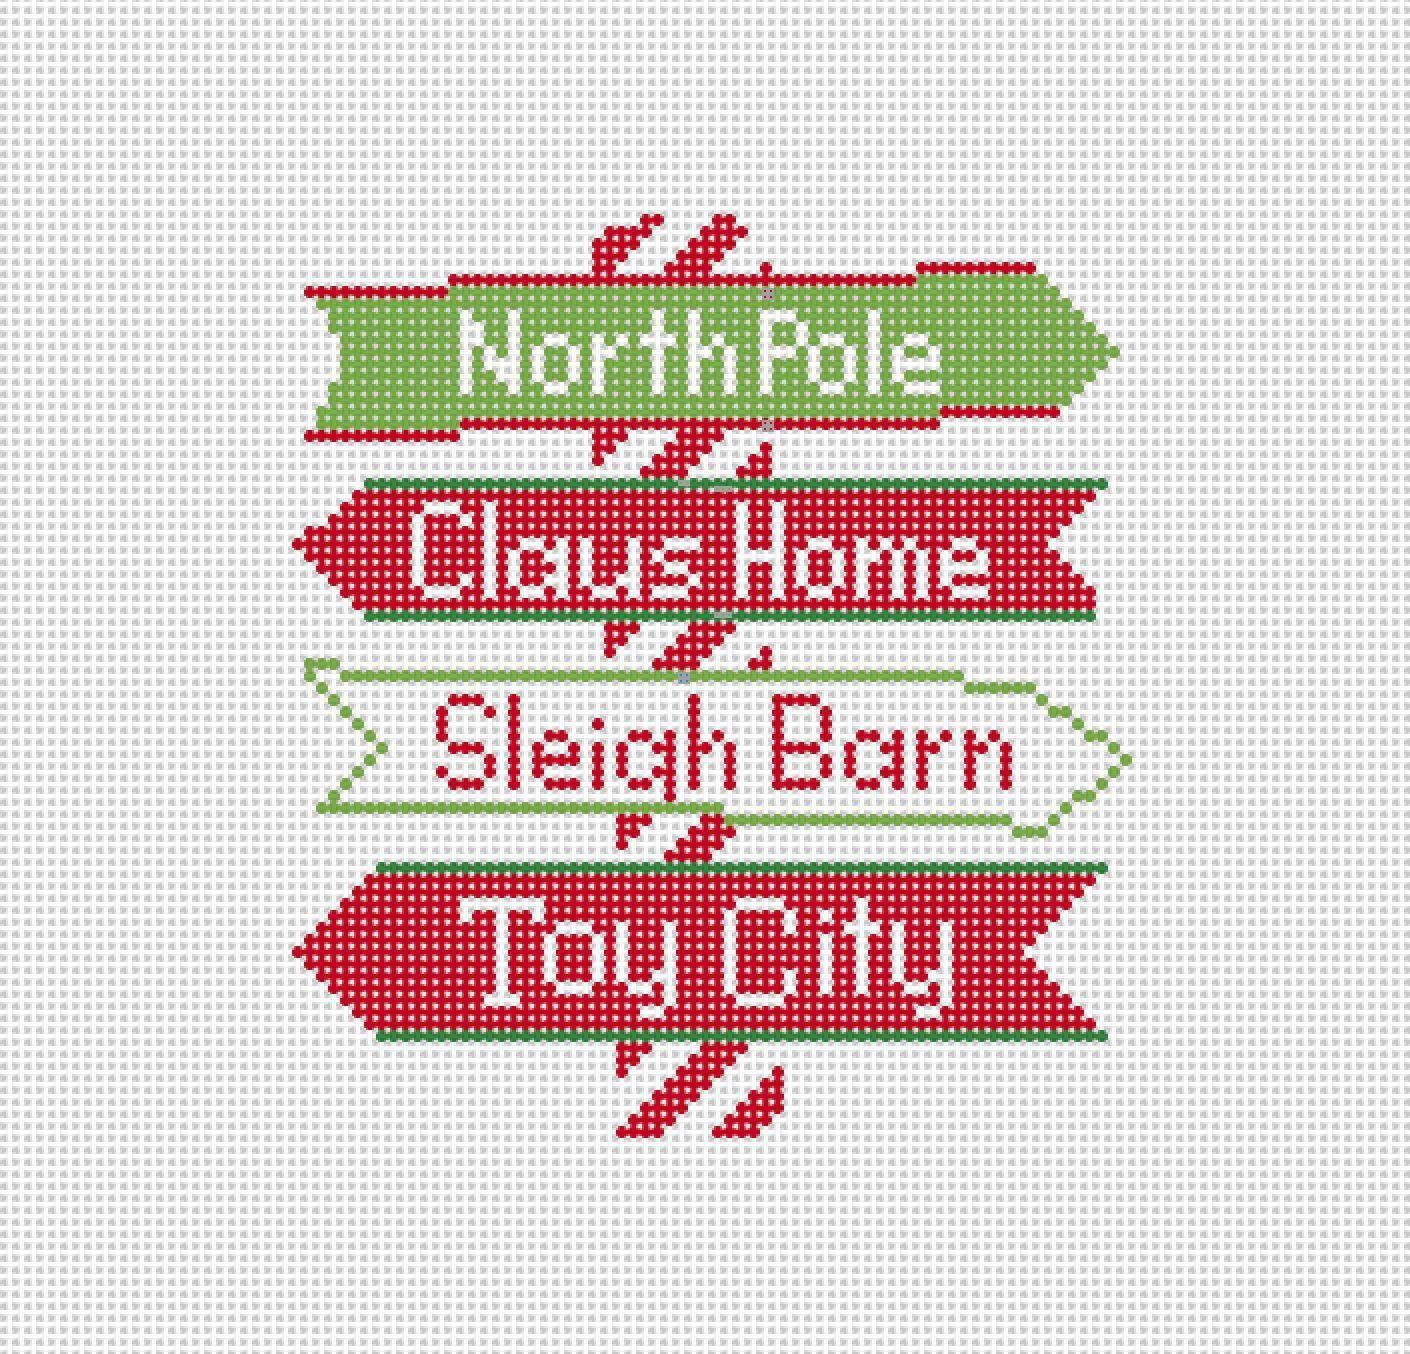 North Pole Destination Sign Needlepoint Canvas - Needlepoint by Laura